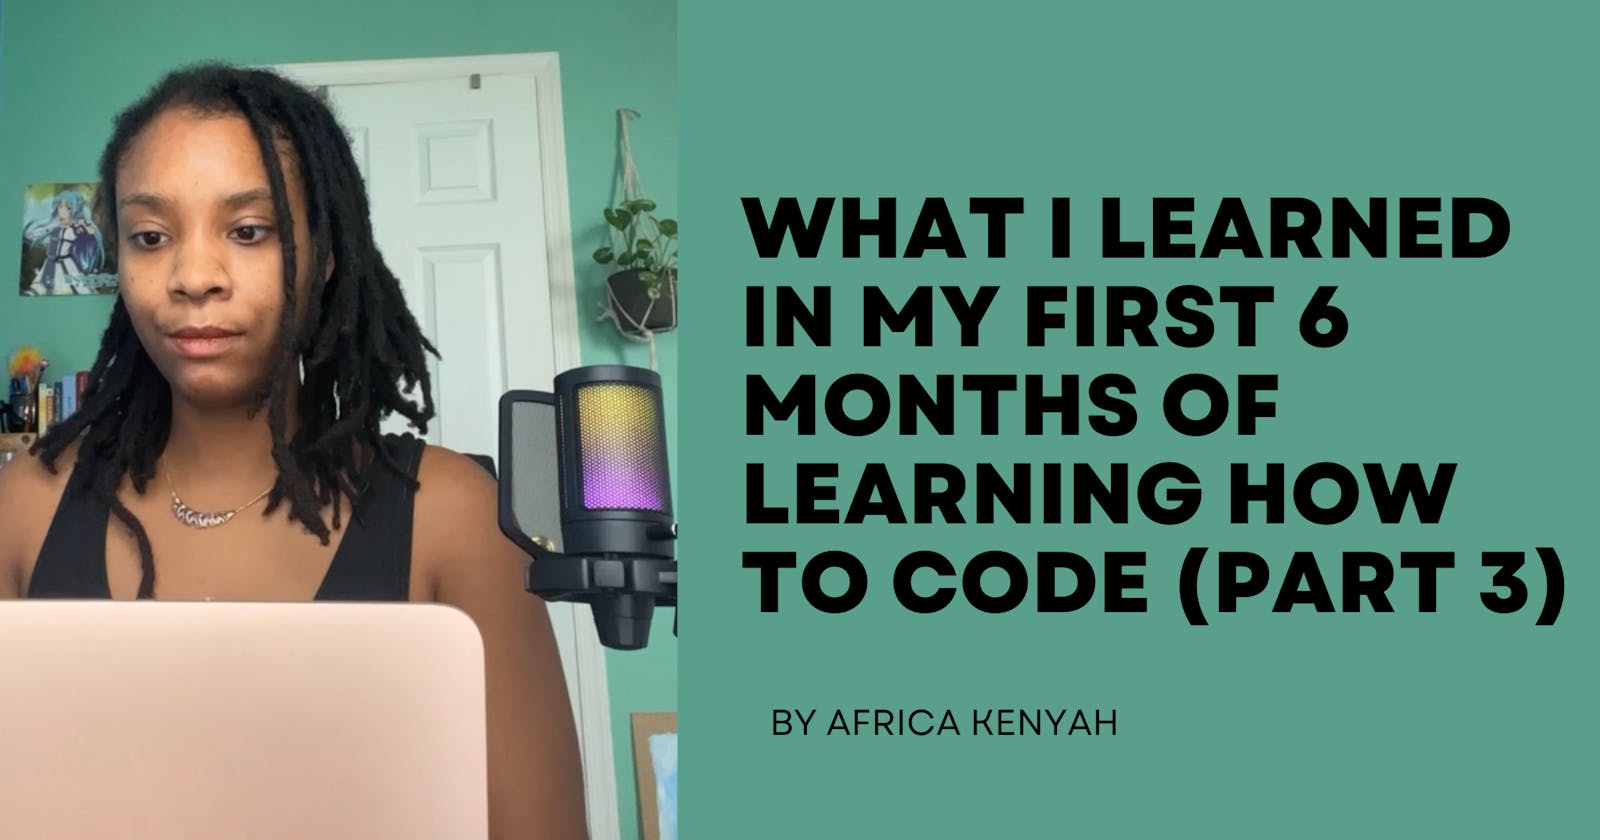 What I Learned in My First 6 Months of Learning How to Code (Part 3)